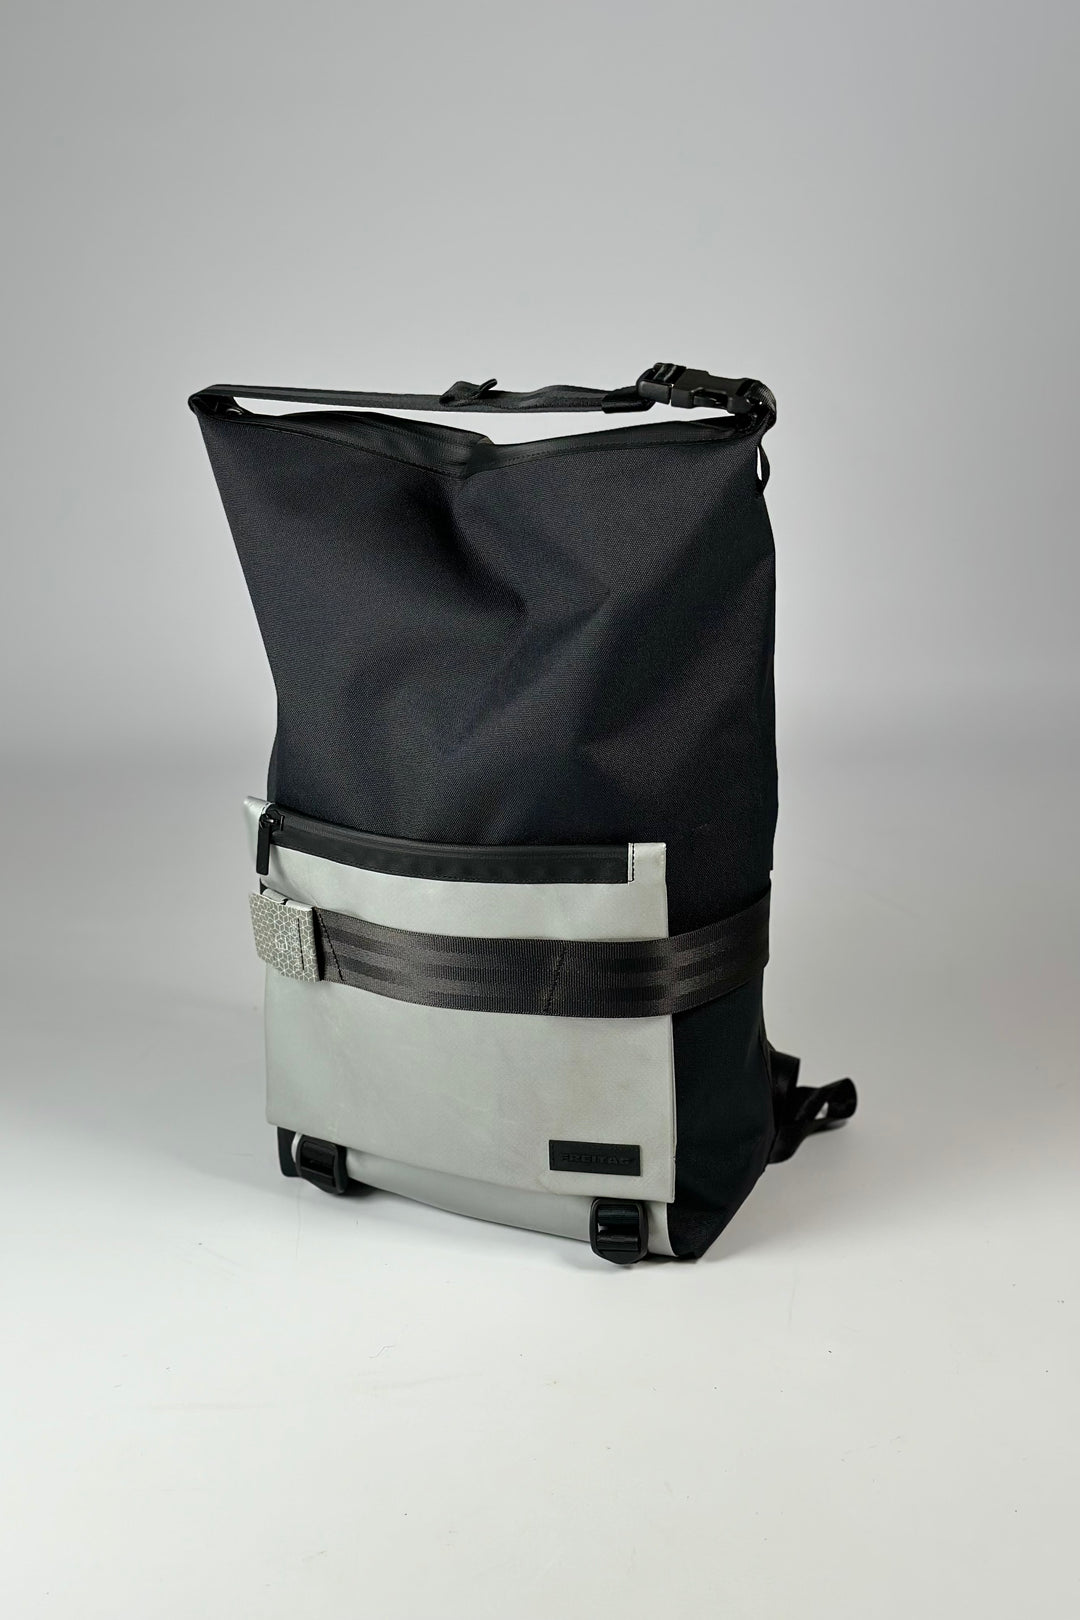 COSTON F690 Backpack